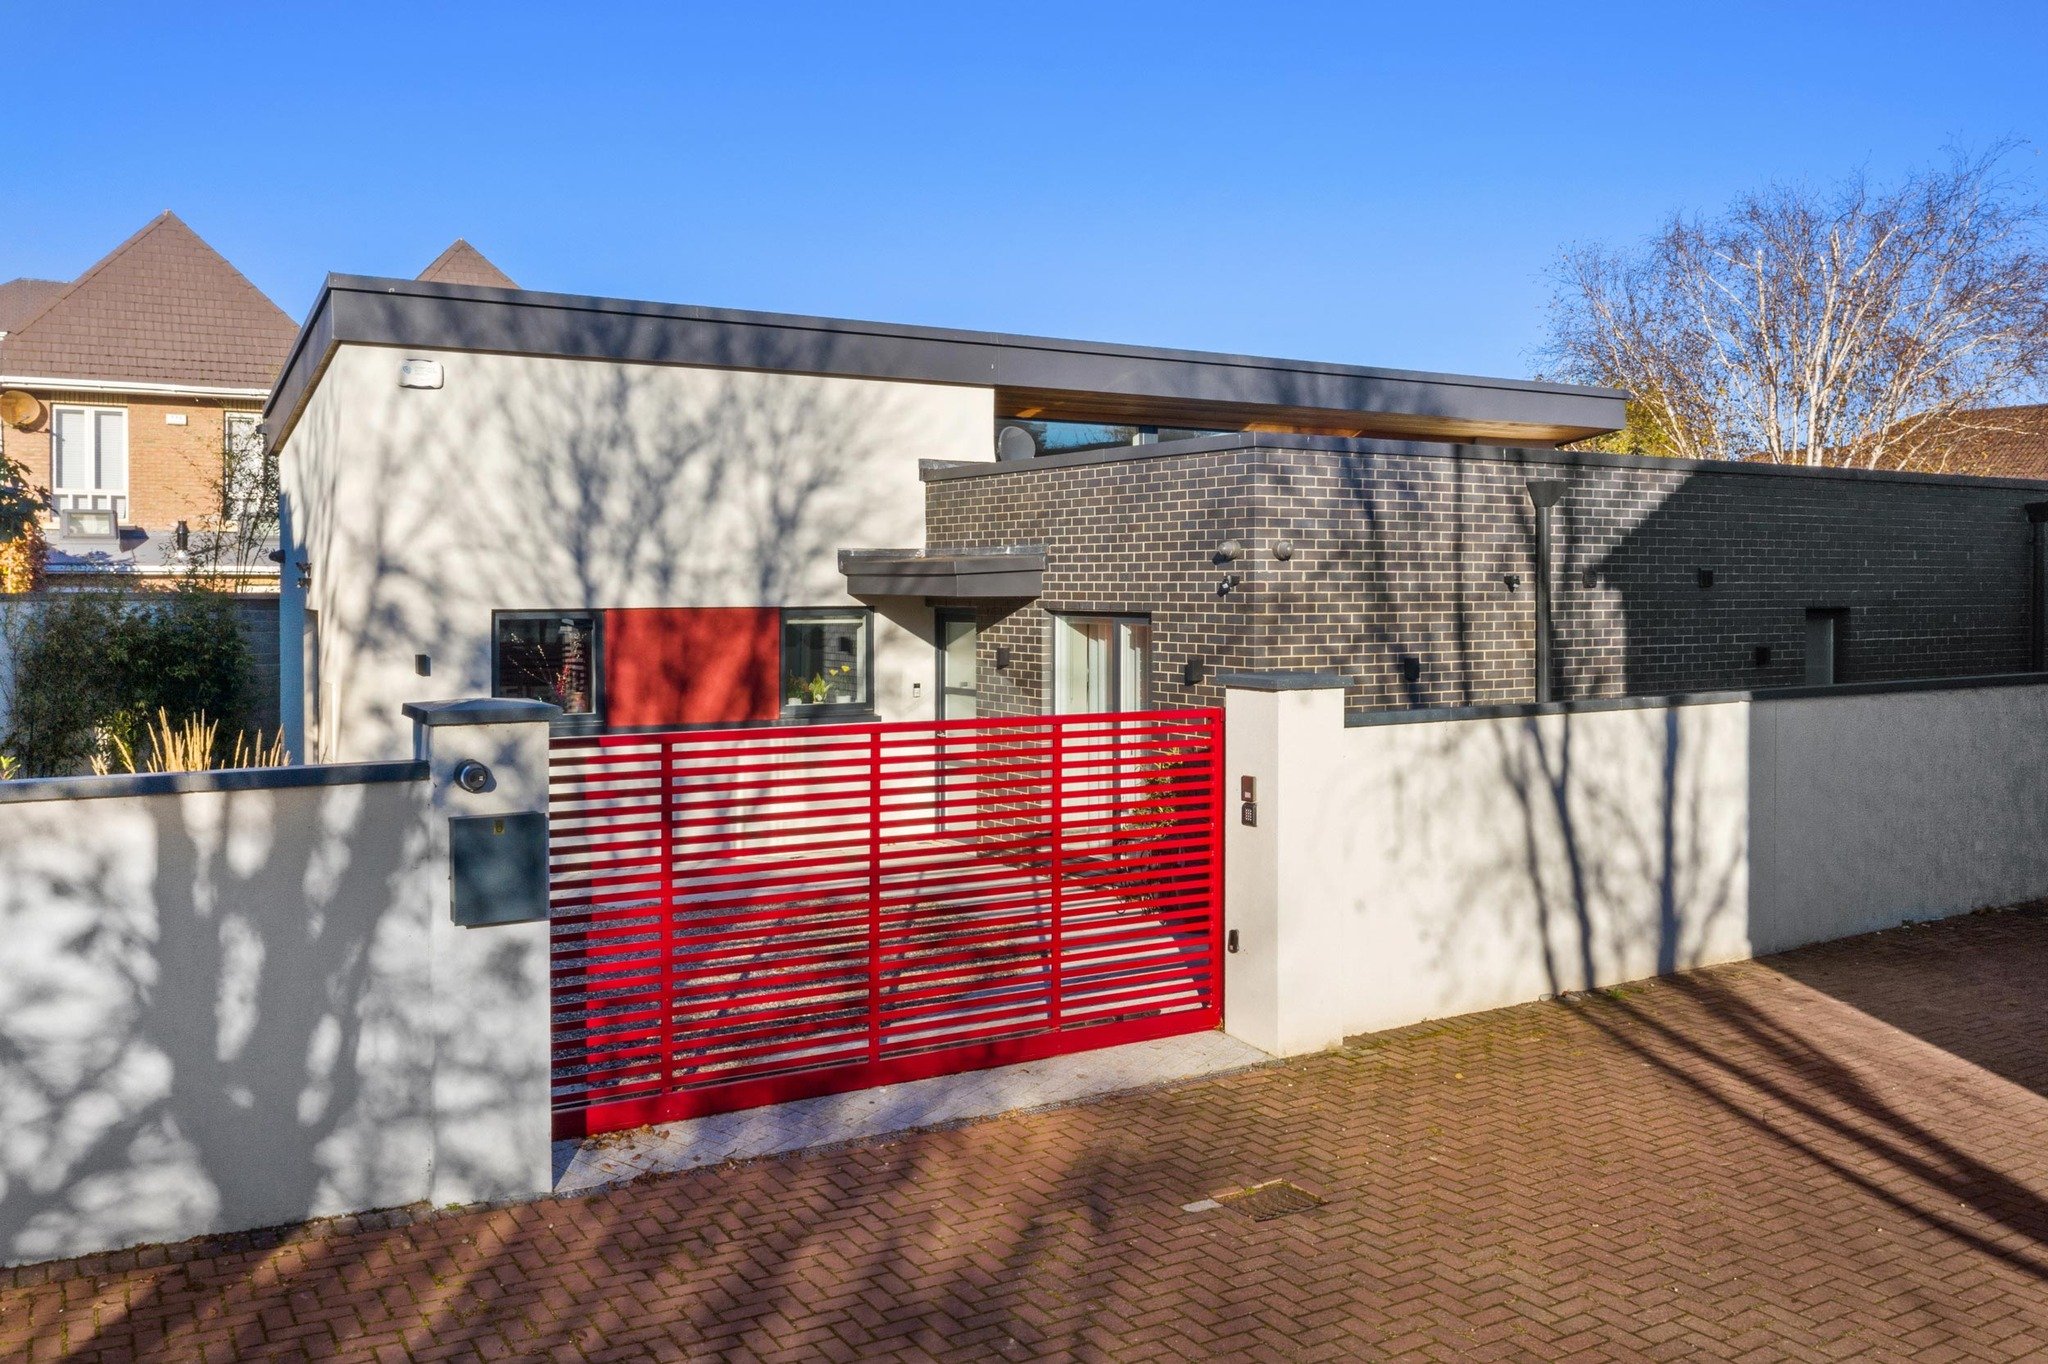 A splash of red that makes a statement. 🏠🔴 

Take a closer look at the unique red gate and accents, each detail adds personality to this home and gives this place a real sense of character.

We will be sharing more of this home over the next few da